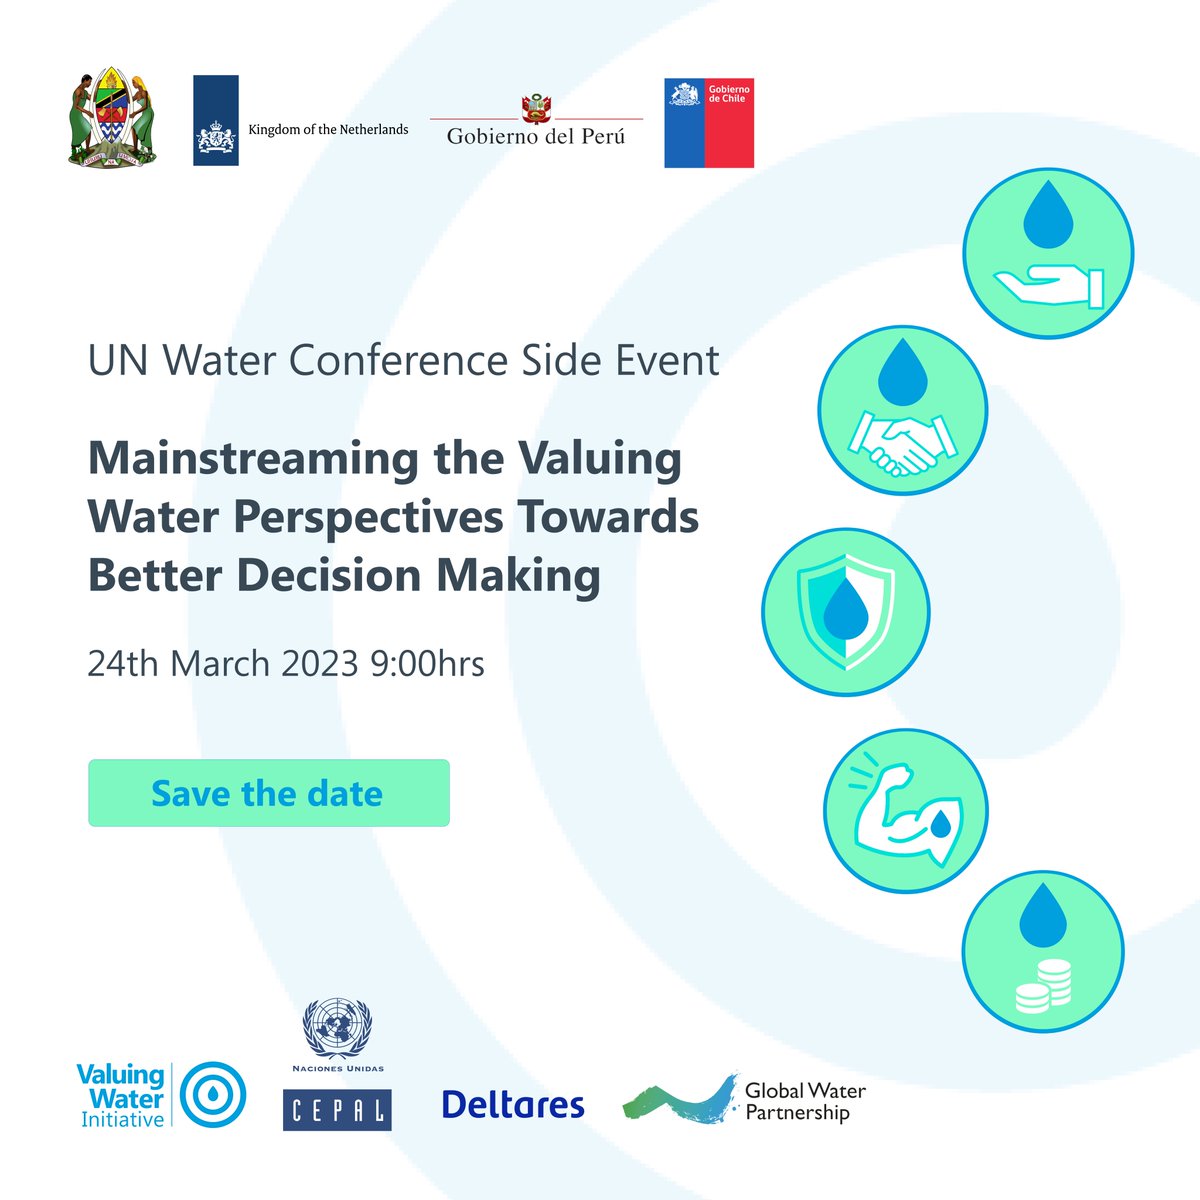 The #UNWaterConference 2023 will focus on uniting the world for water💧But we need to understand how people across the world #ValueWater Register here to join us at the conference ➡️ bit.ly/41ENry5 @tanzaniagov @GobiernodeChile @GWPnews @deltares @eclac_un @UN_Water